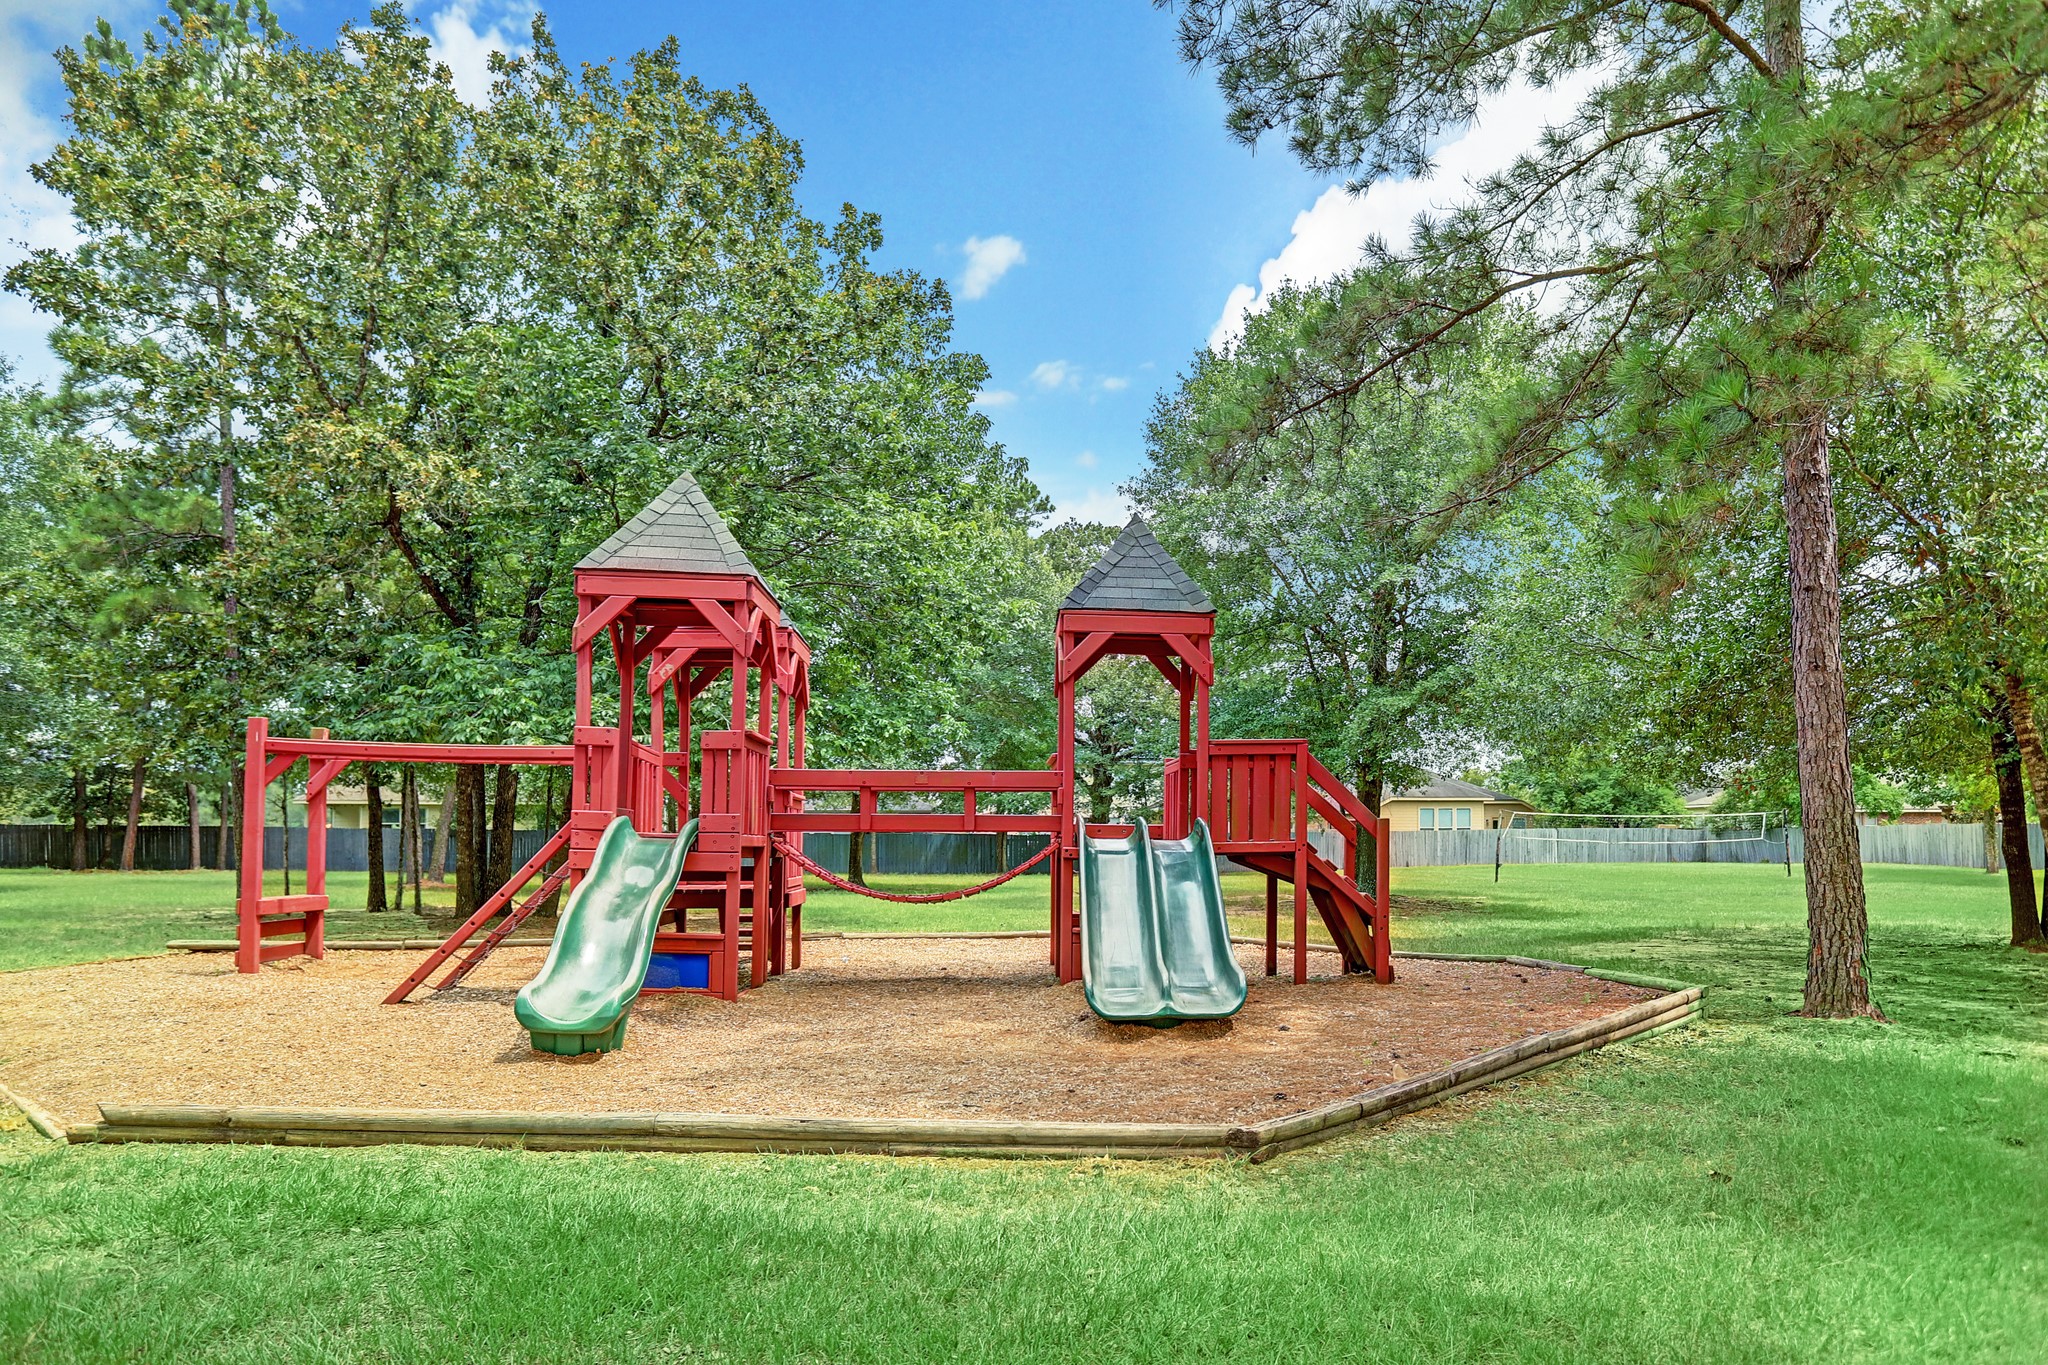 Let your little ones play at this cute play area located in Glen Oaks.